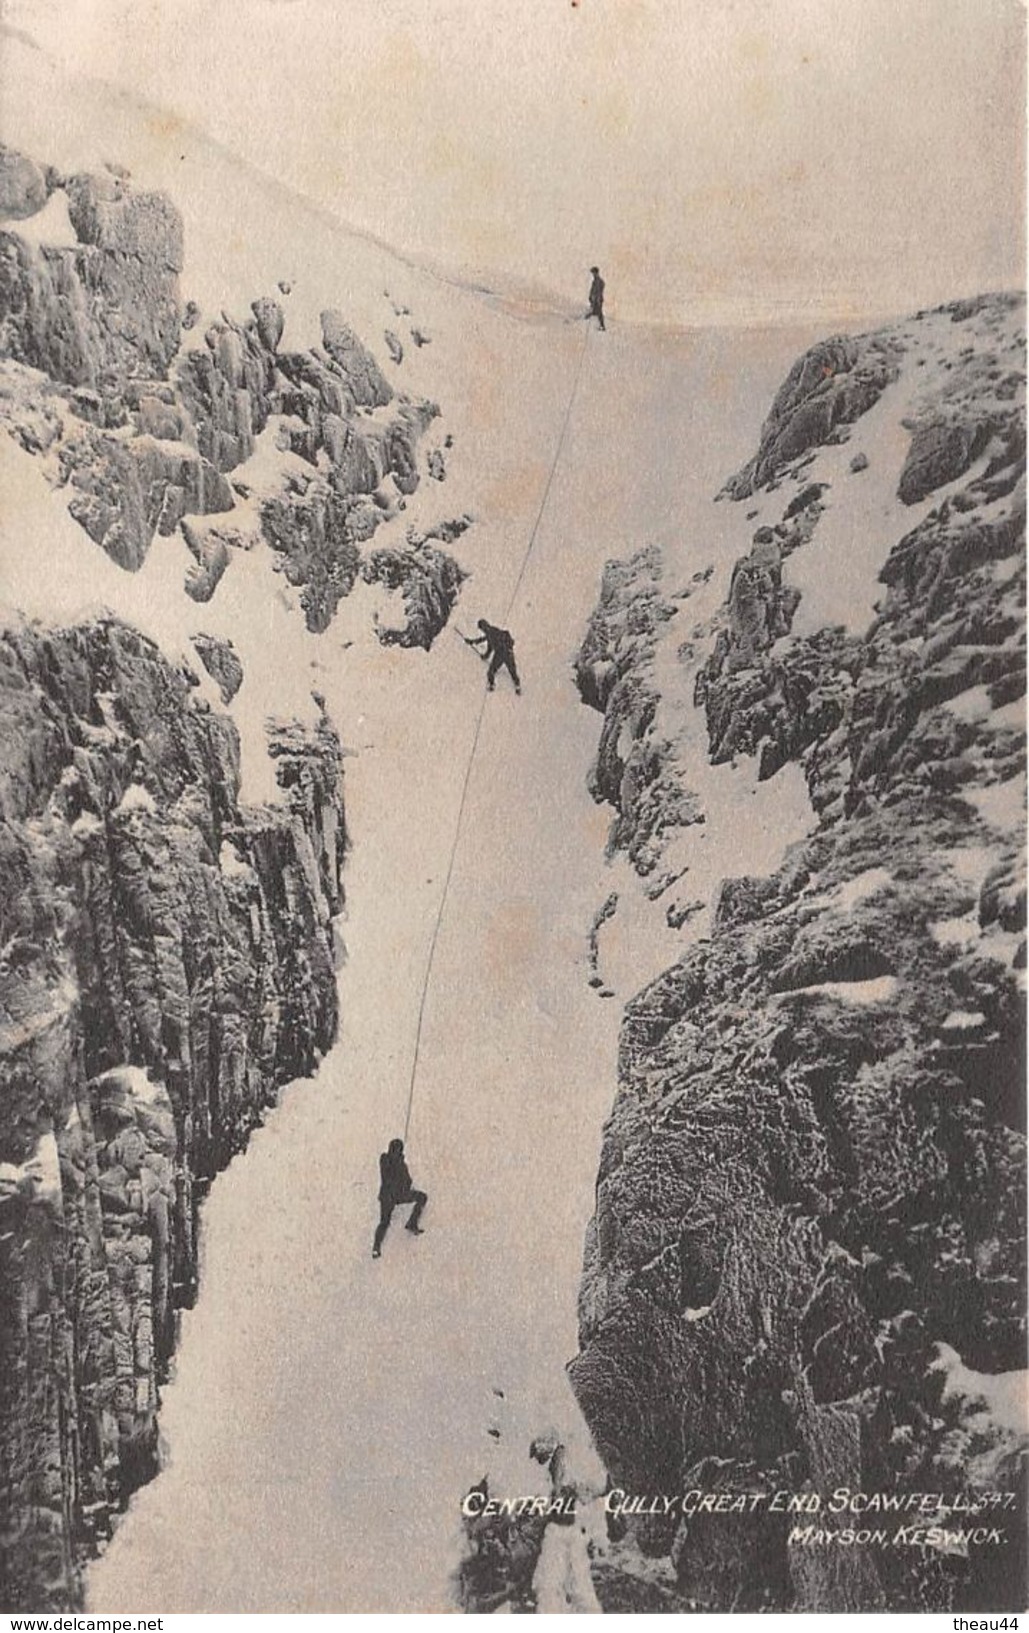 ¤¤    -   Sport  -  ALPINISME   -  Central Gully Great End Scawfell   -   ¤¤ - Alpinisme